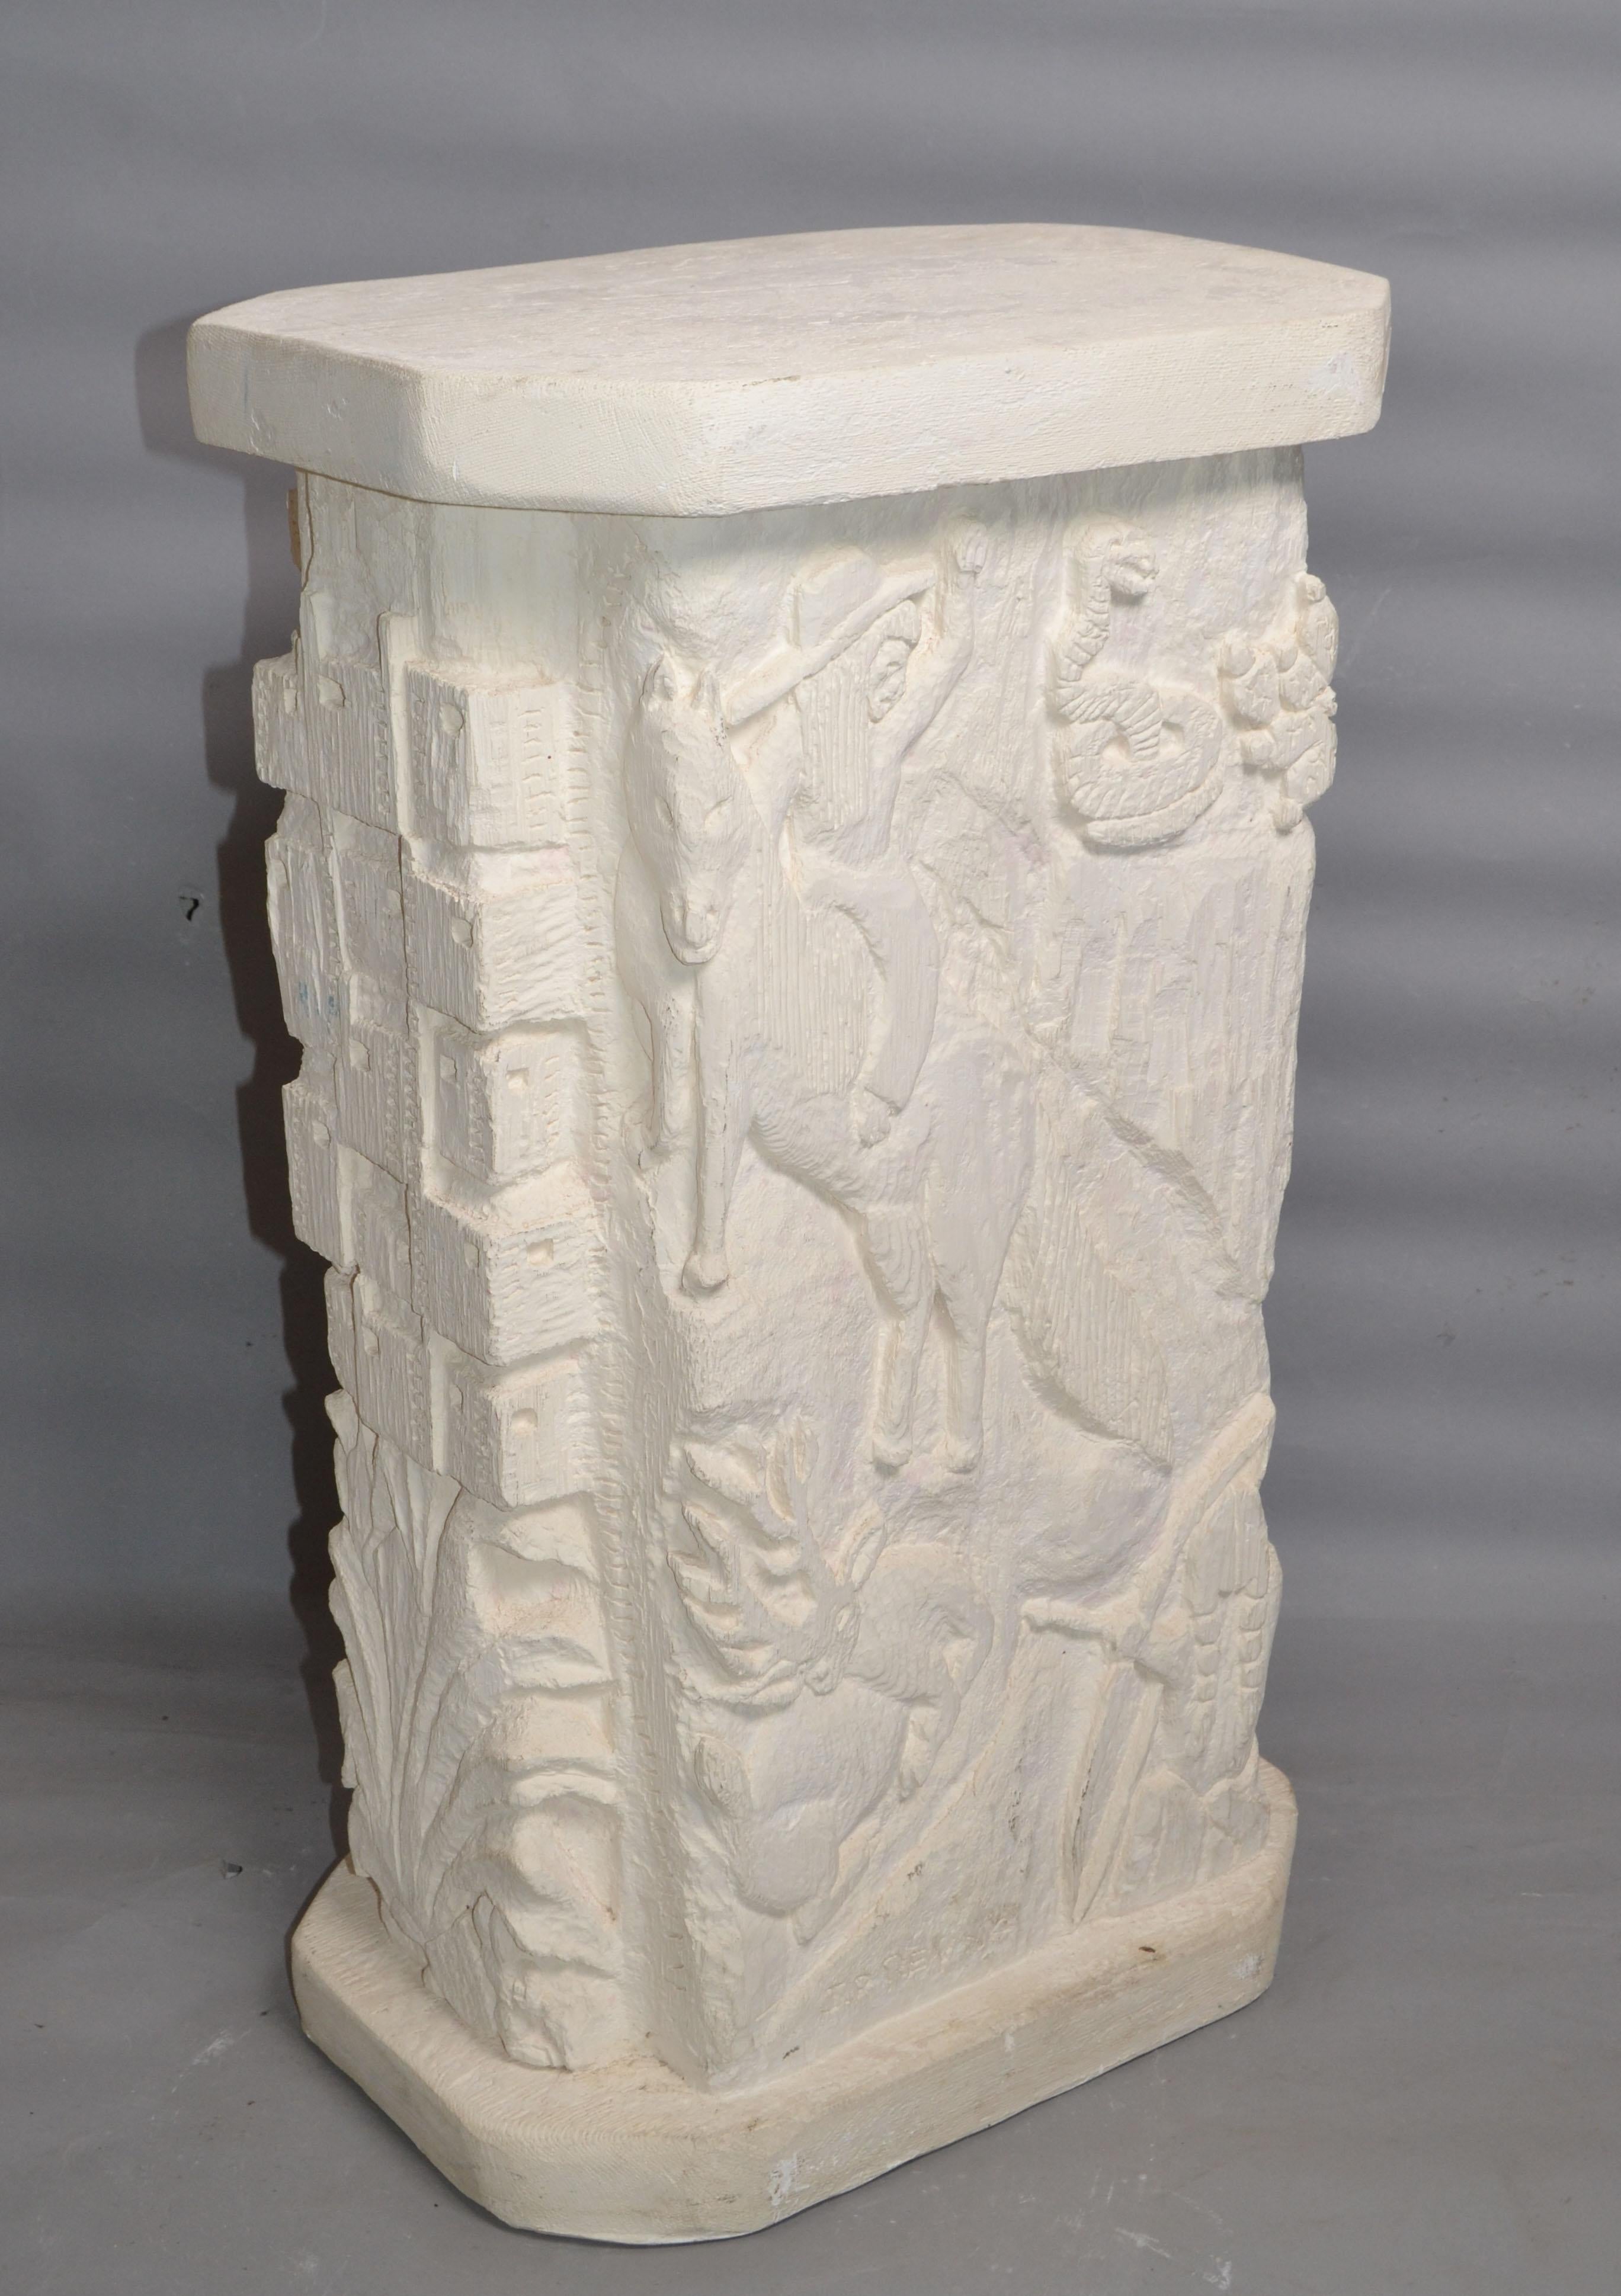 American Southwestern Style Folk Art hand-carved plaster center table, pedestal, column or console table.
Beautifully crafted and depicting Southwestern scenes all around. 
Can be used as a sculpture or with a glass top as a coffee table, center